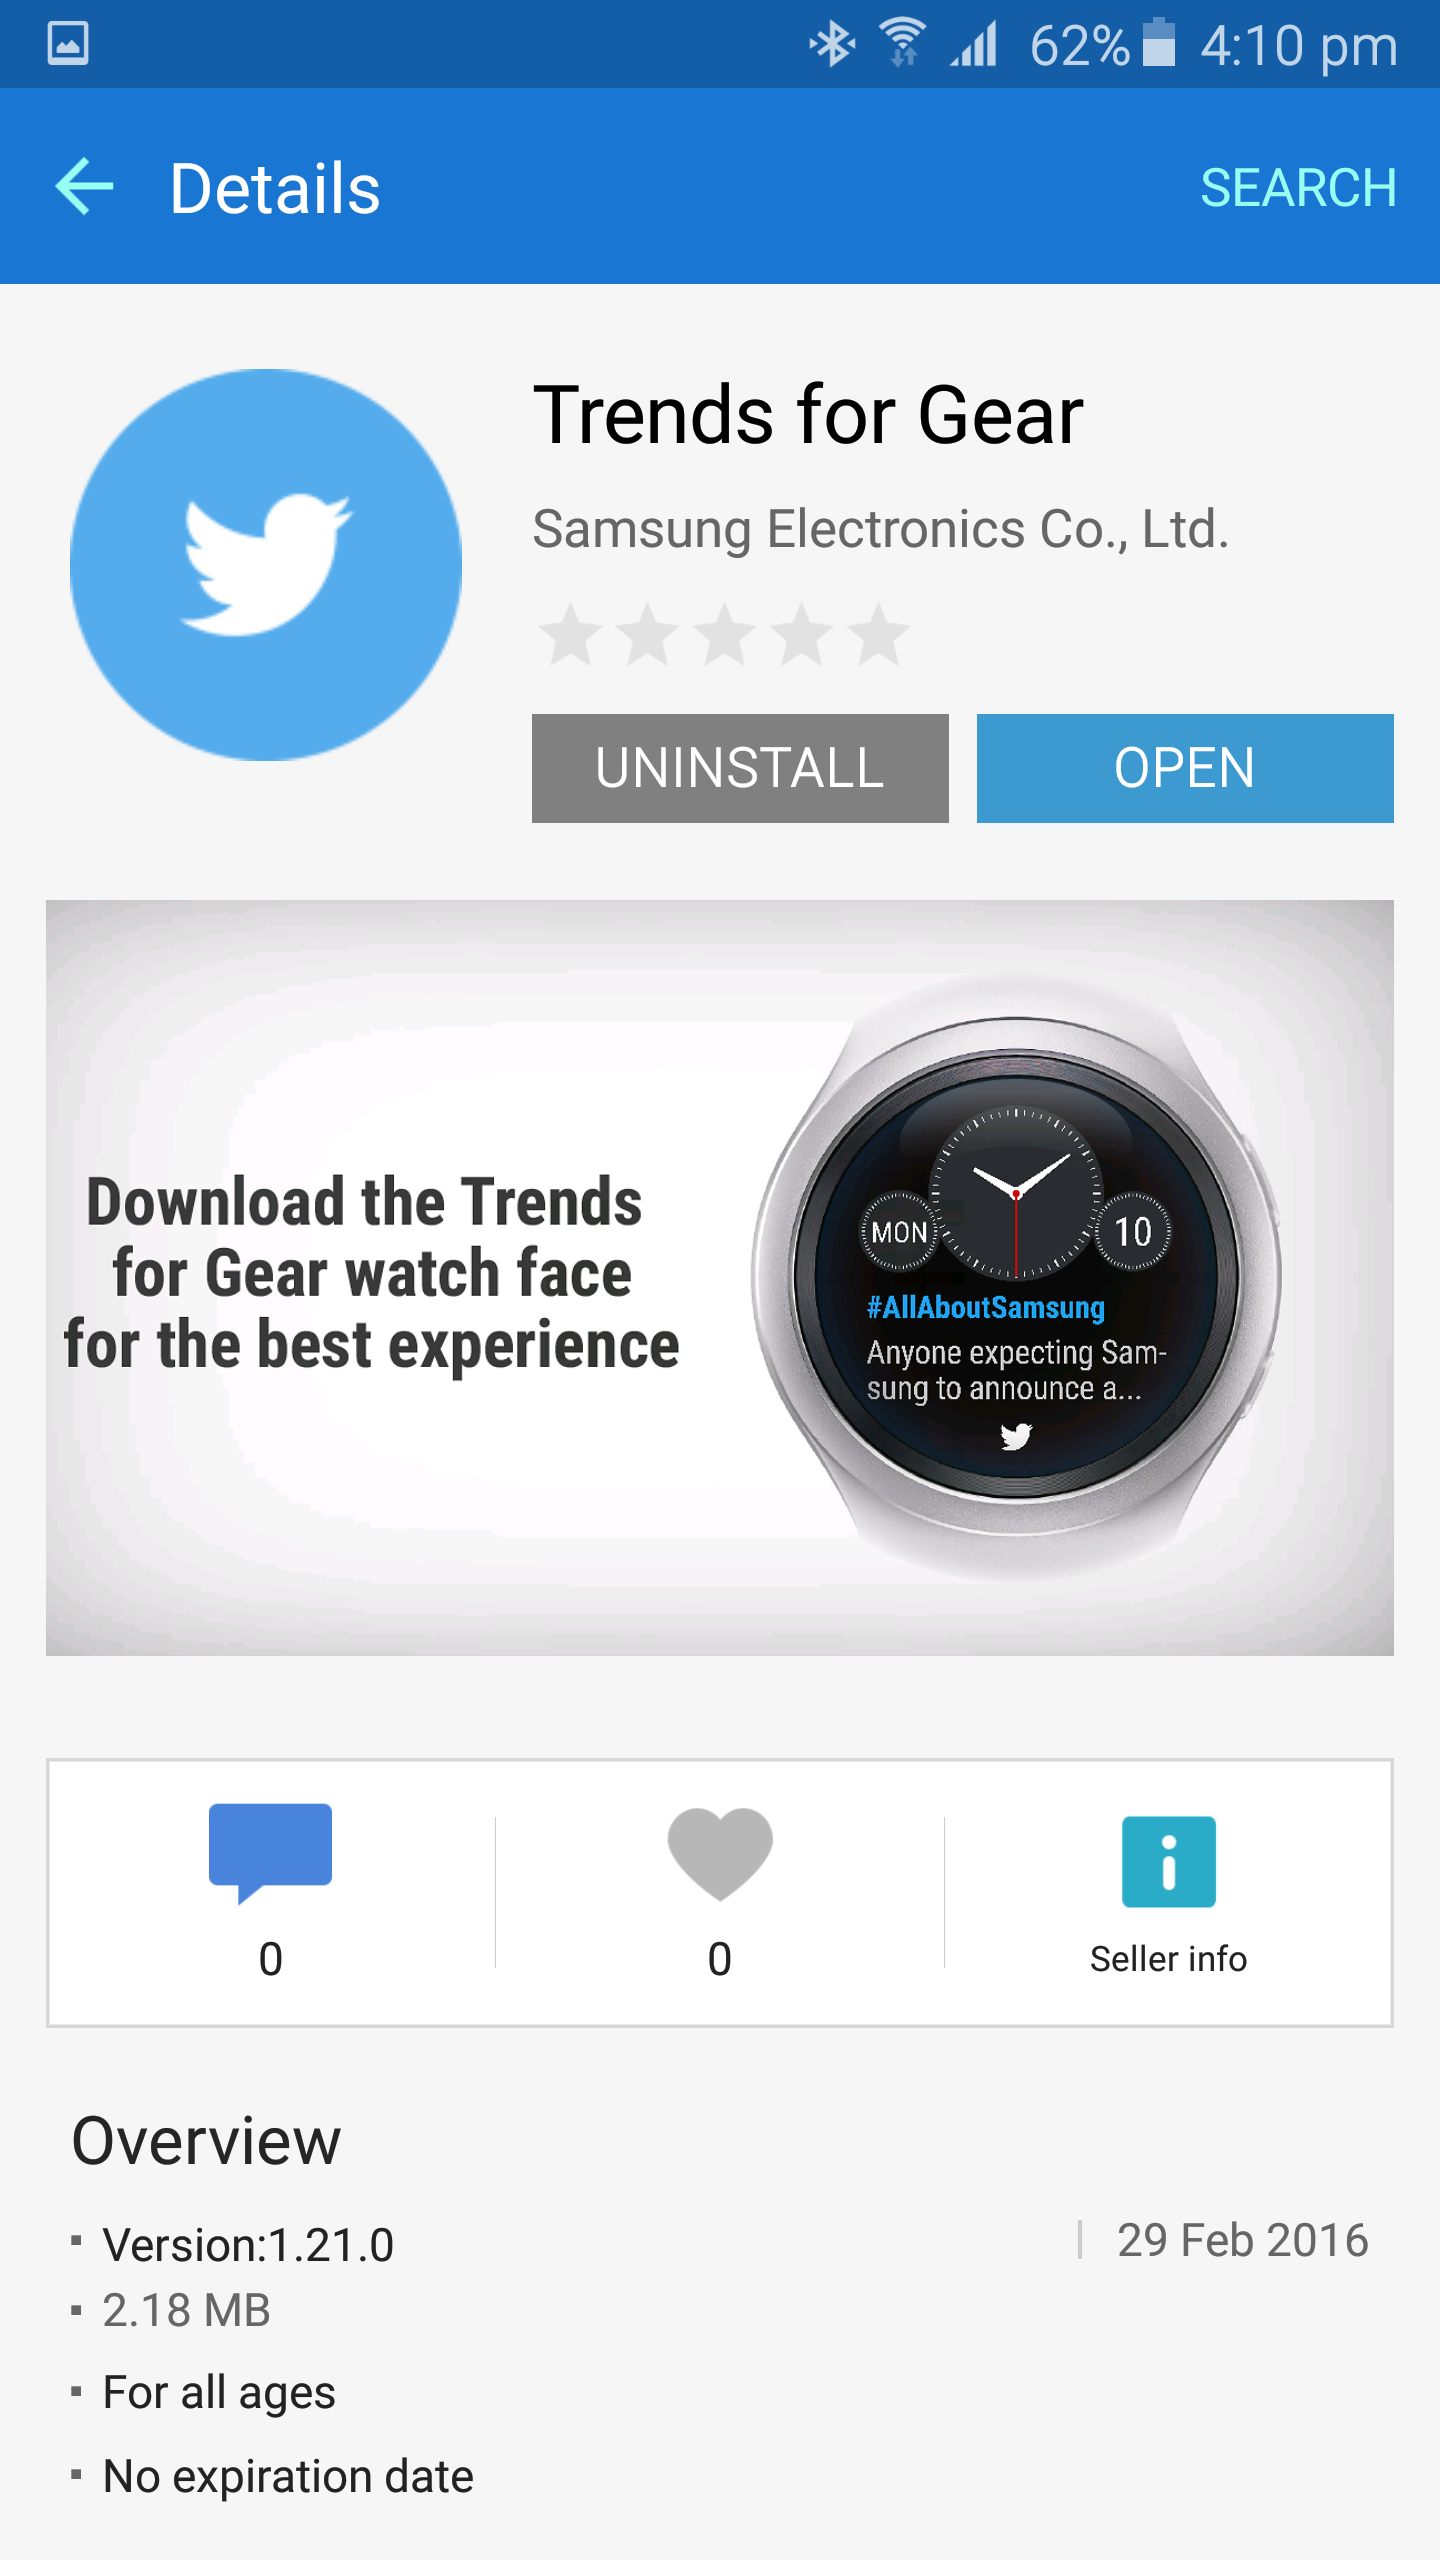 Samsung brings Twitter trends to your wrist with new watch face for Gear S2  - SamMobile - SamMobile